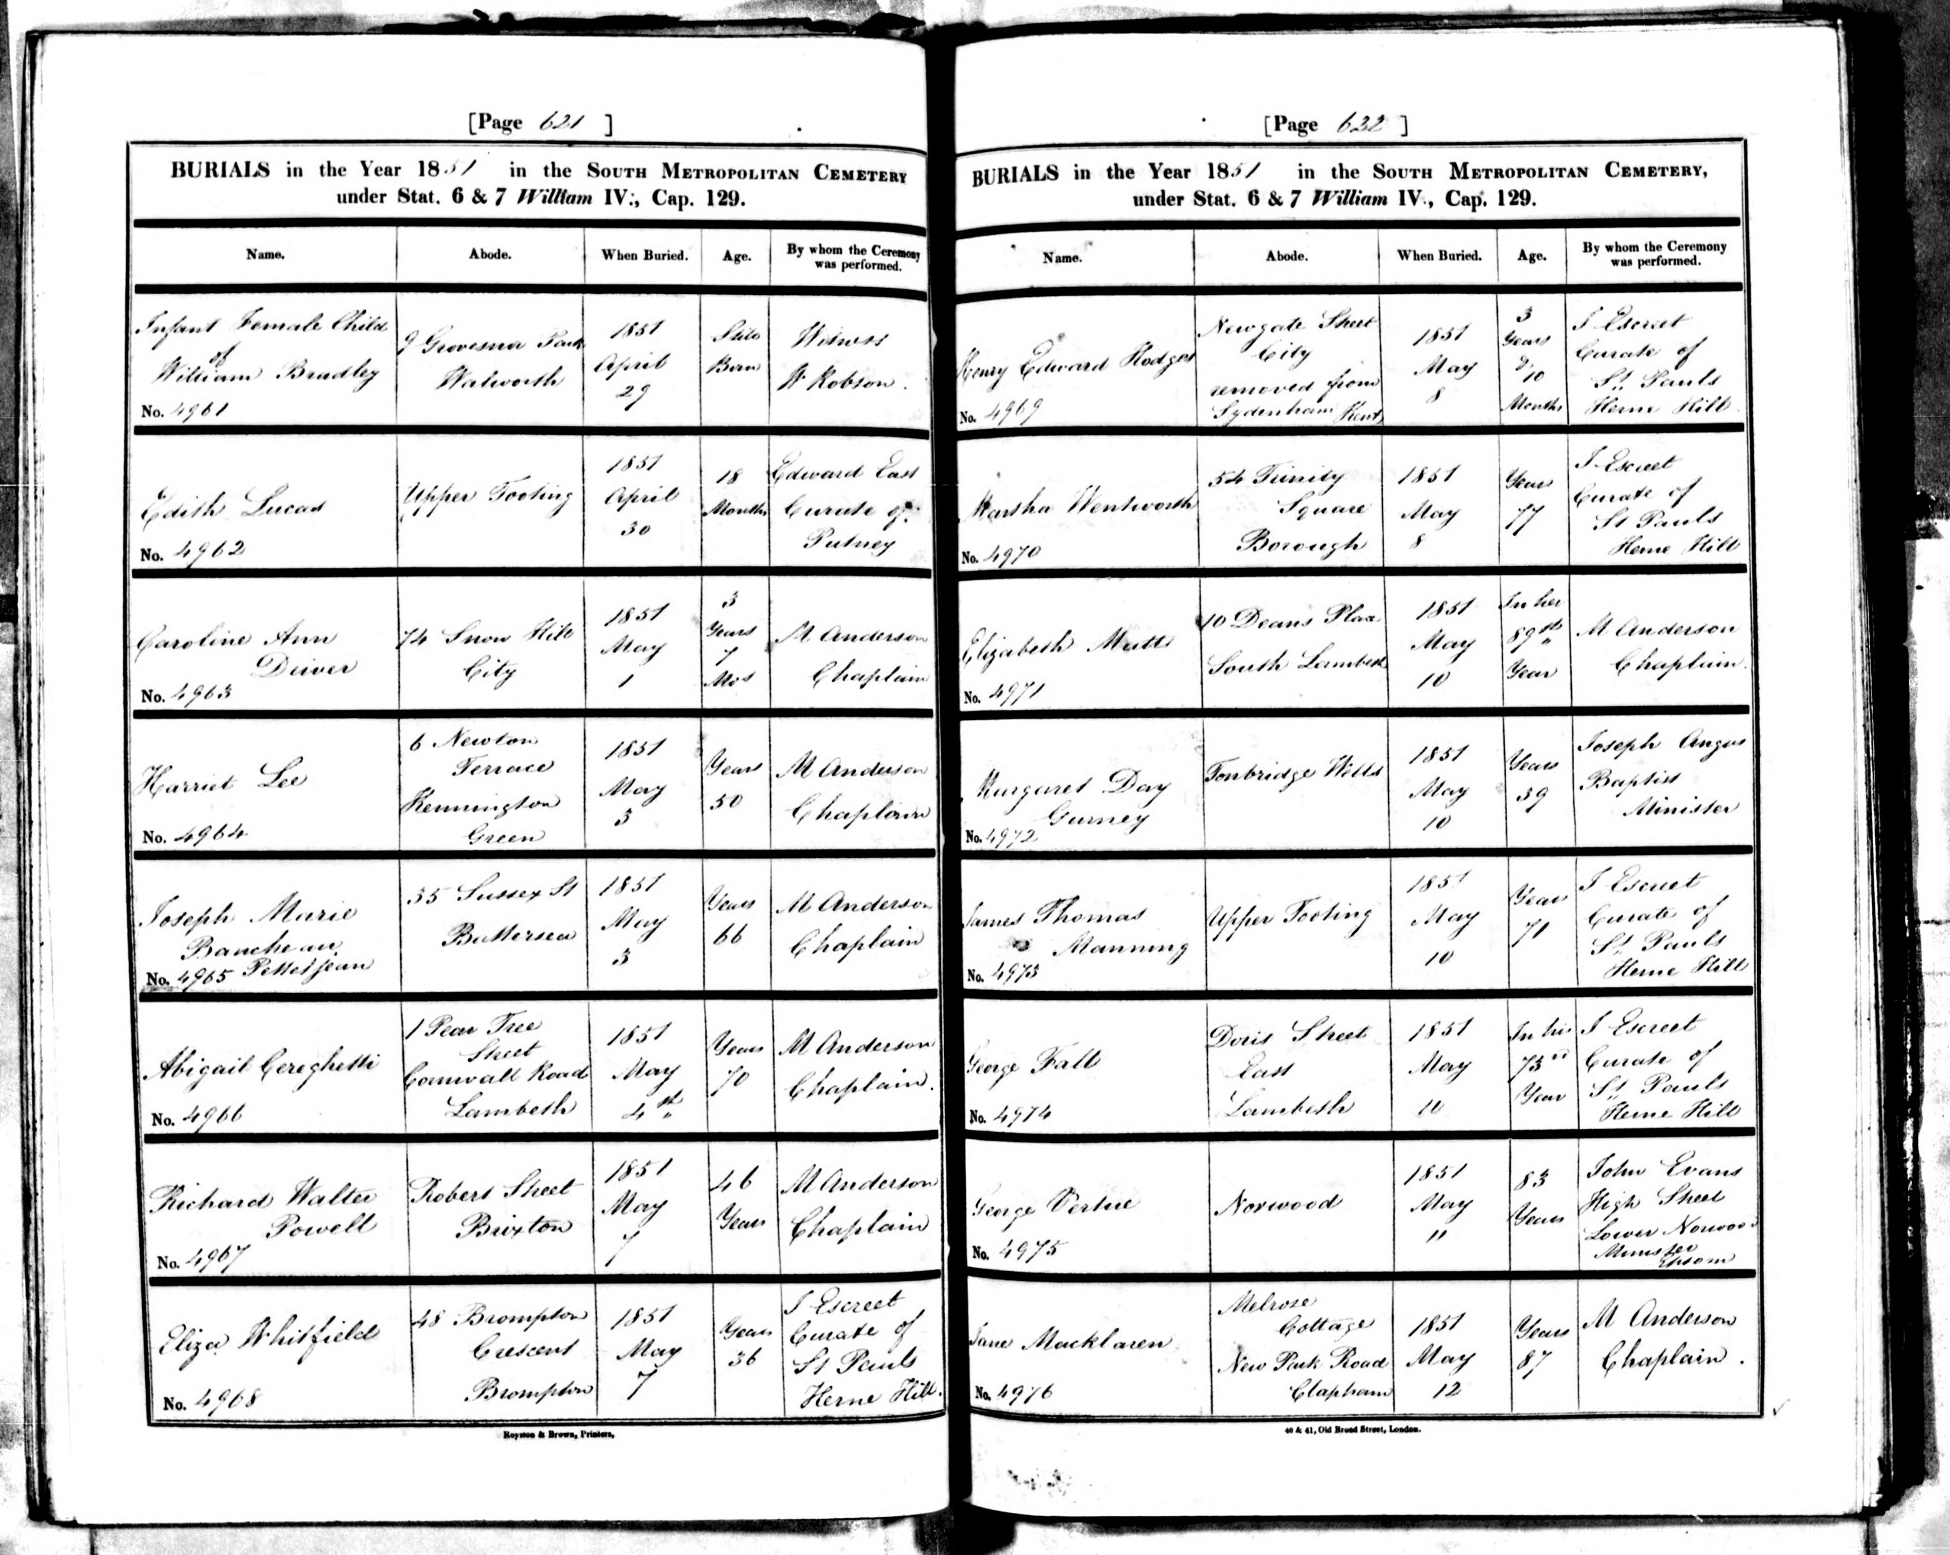 George Vertue’s burial record 1851, aged 83